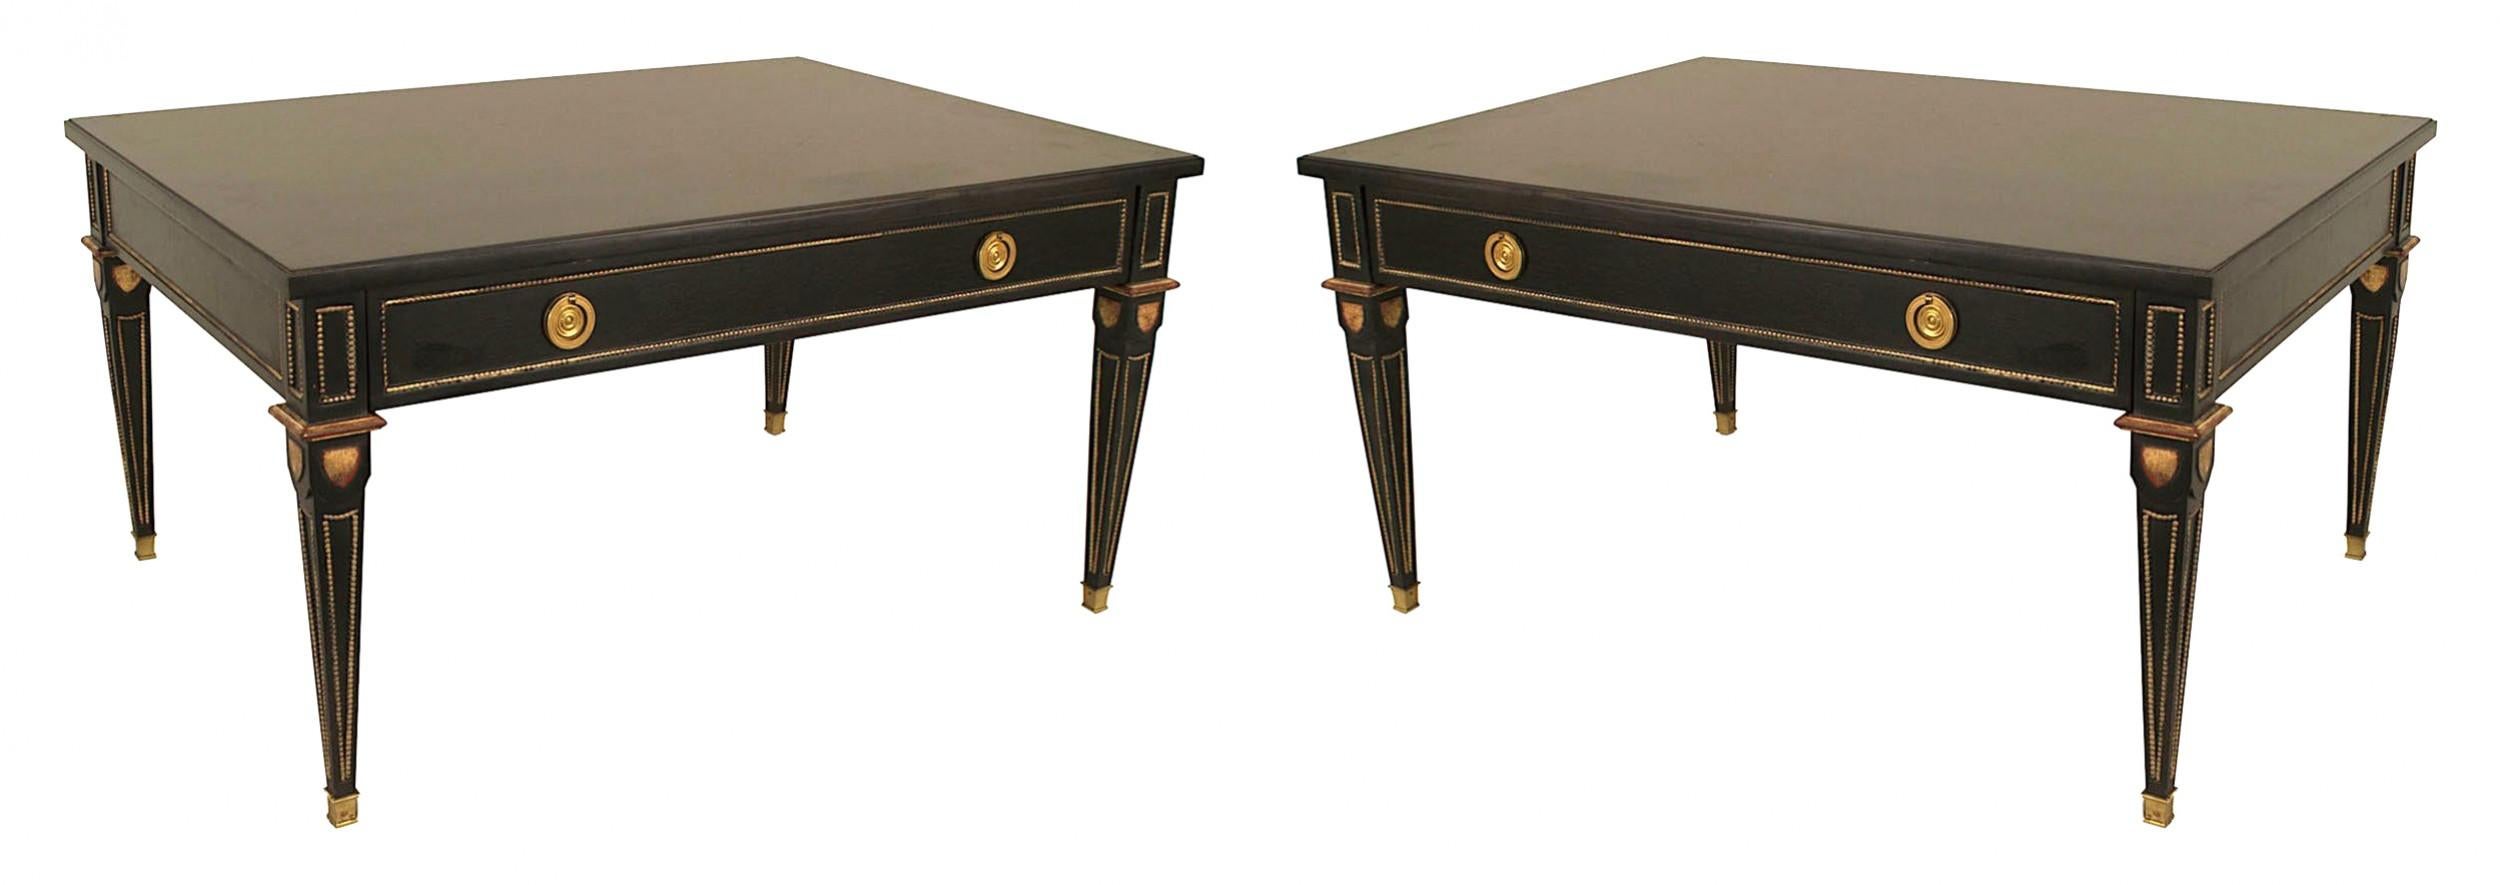 2 French Louis XVI-style (1940s) rectangular ebonized and gilt coffee tables with one drawer, bronze trim, and square tapered legs. (stamped: JANSEN) (PRICED EACH)
